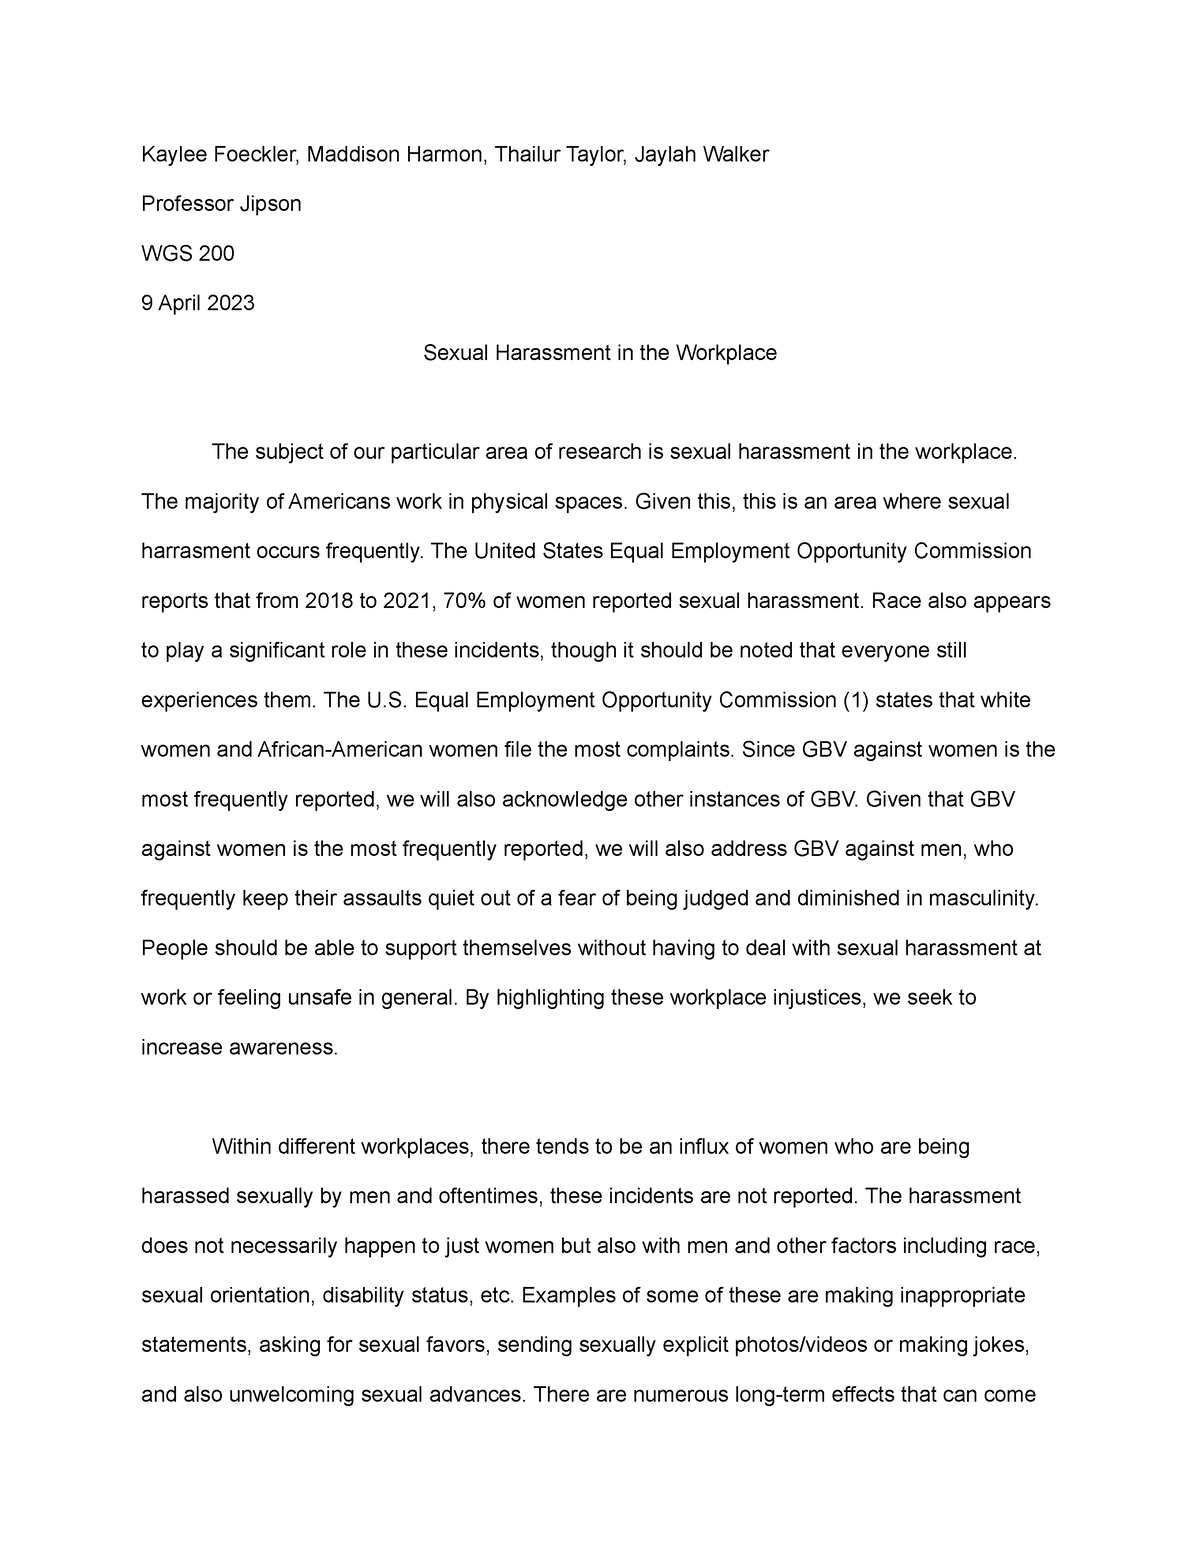 introduction of gbv essay